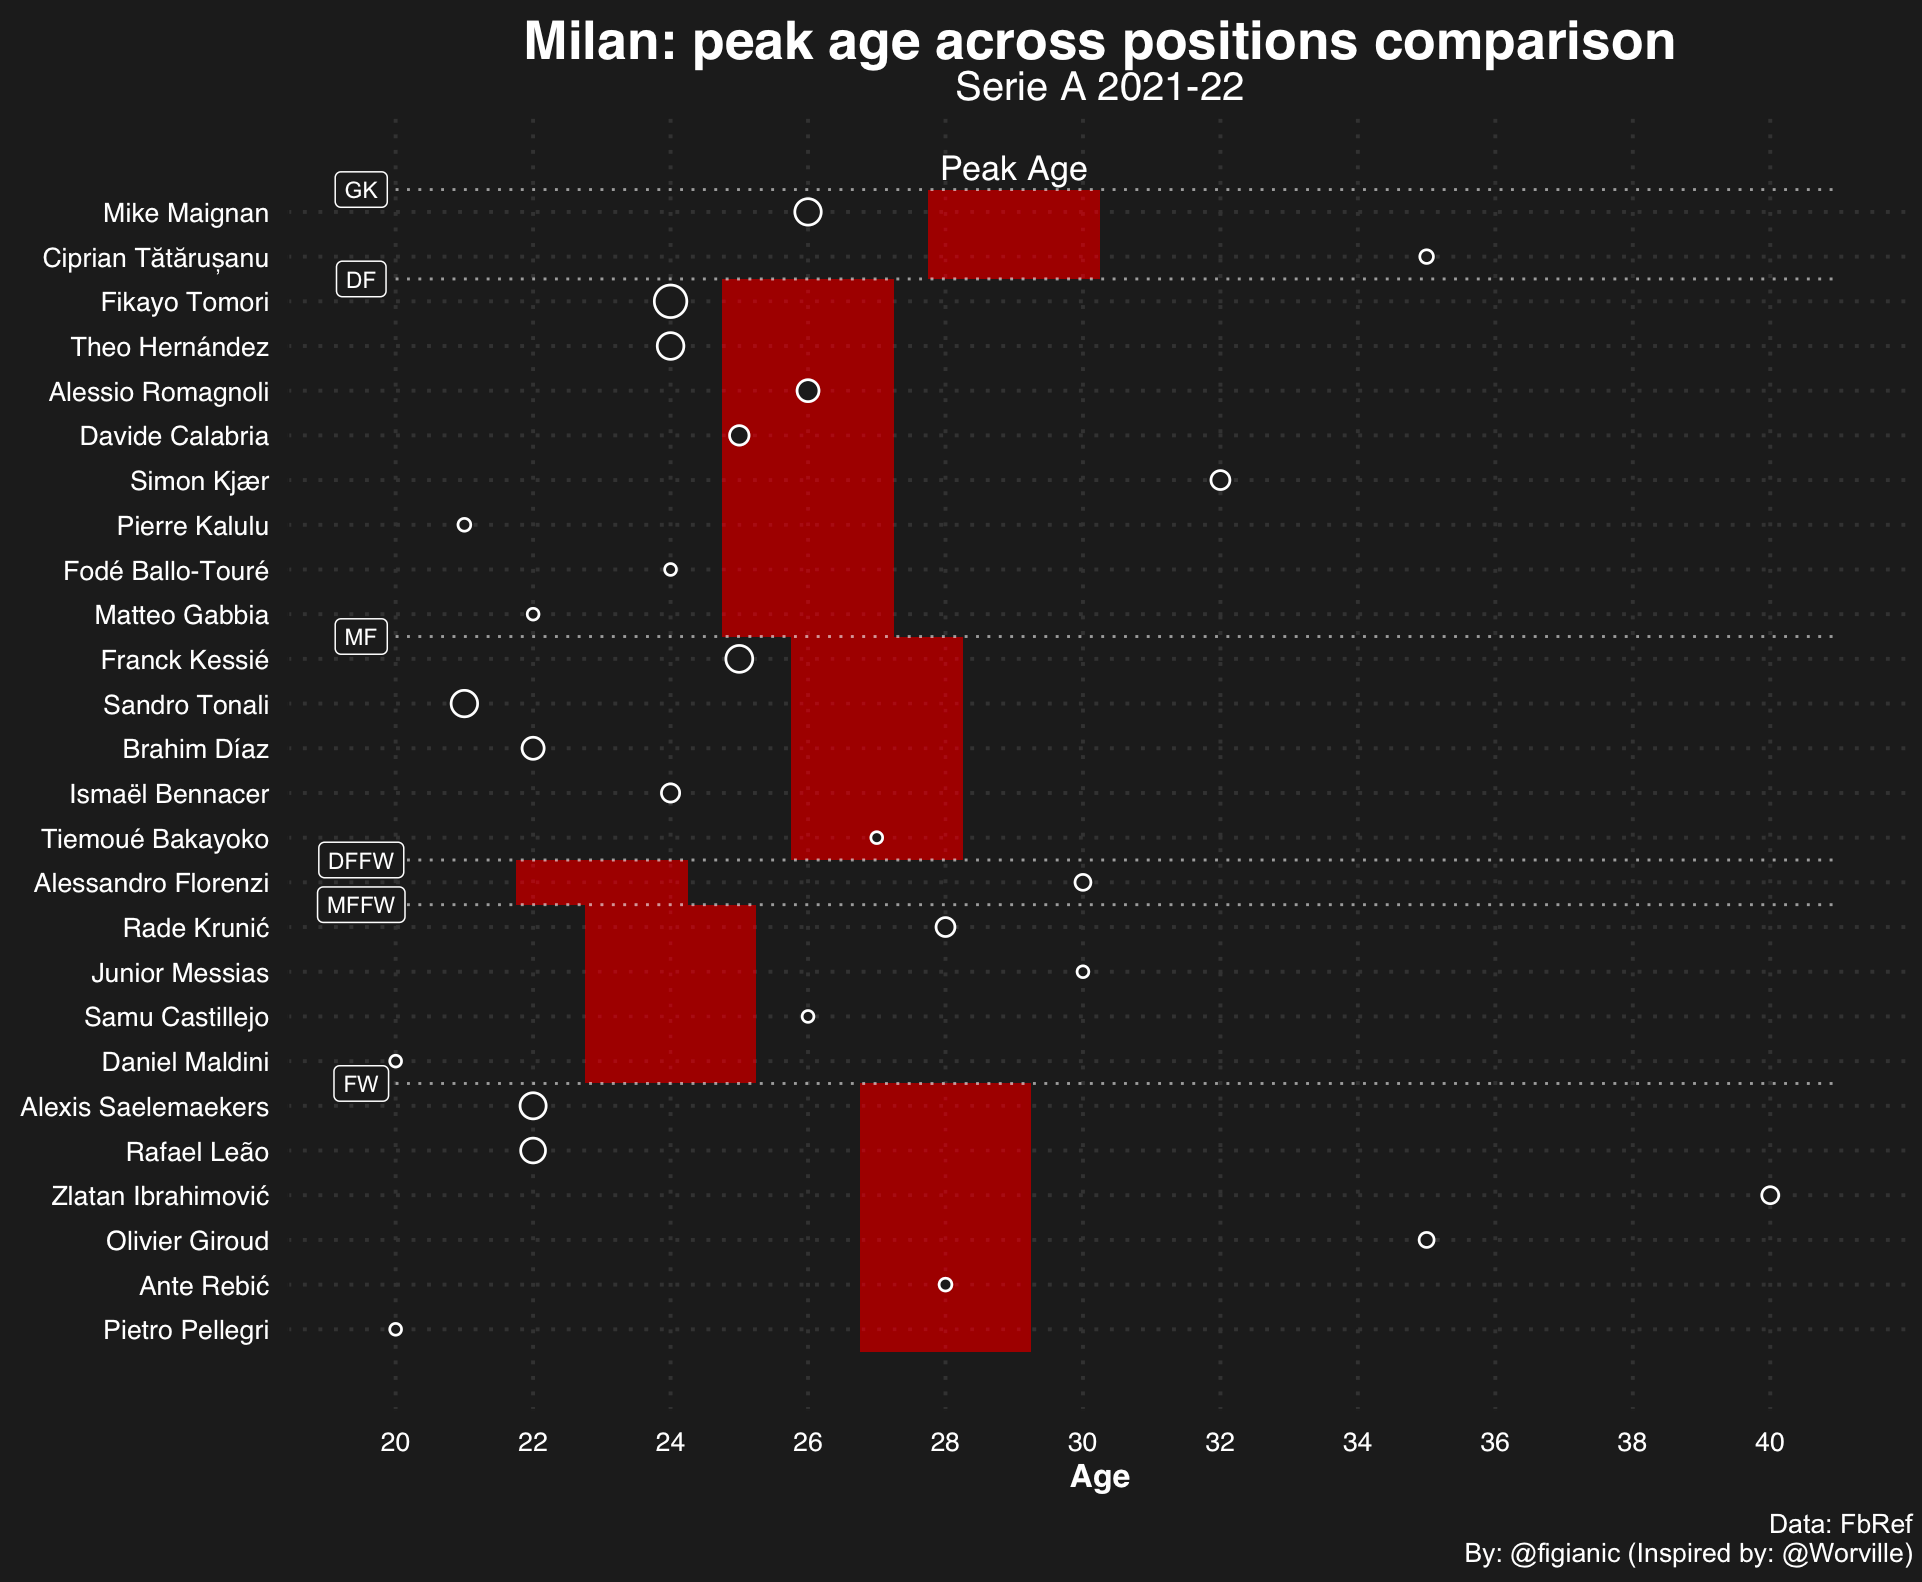 Do Serie A teams invest in young talents or rely on accomplished players?